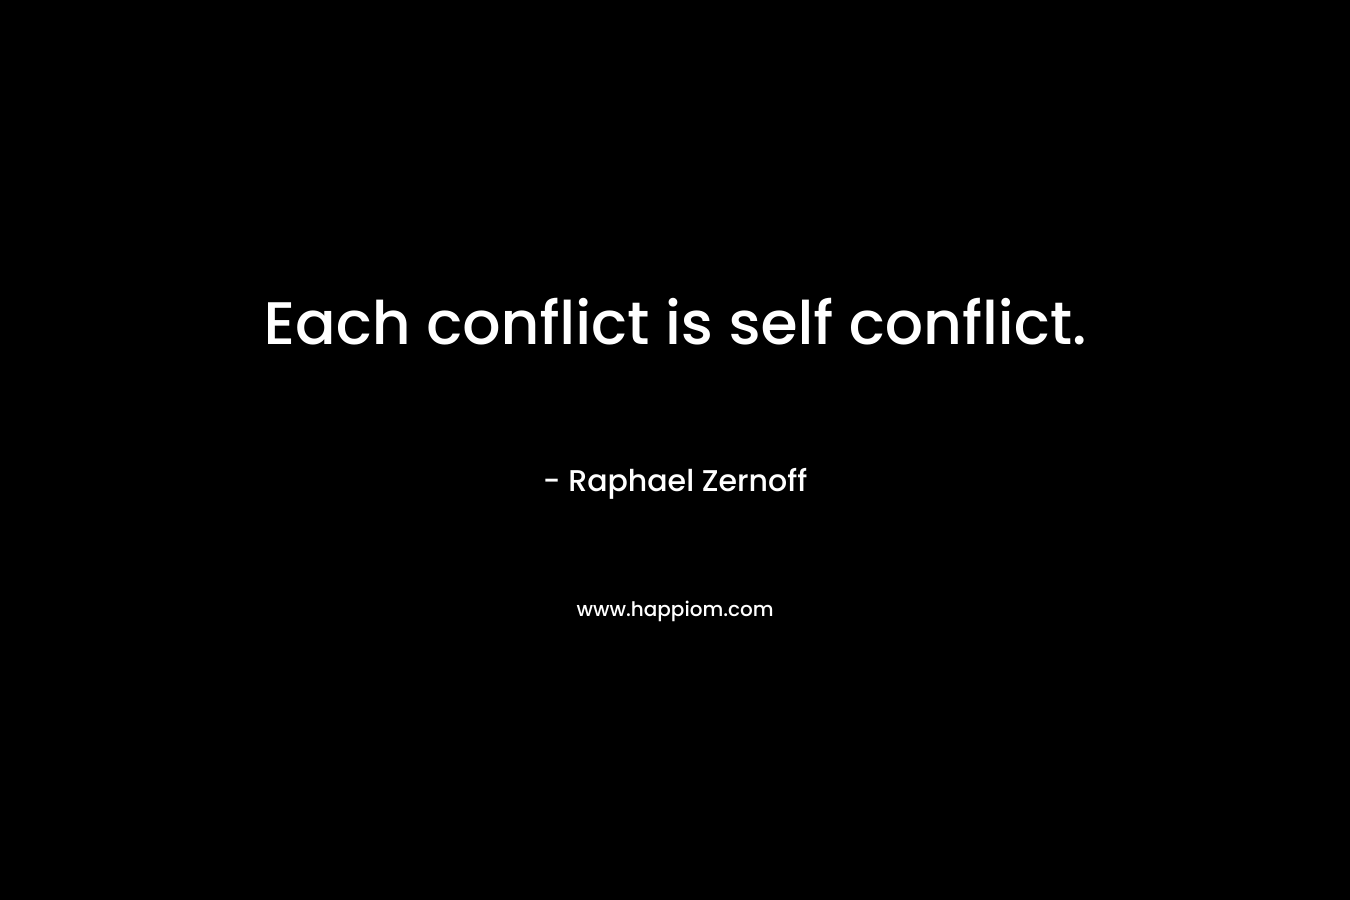 Each conflict is self conflict.